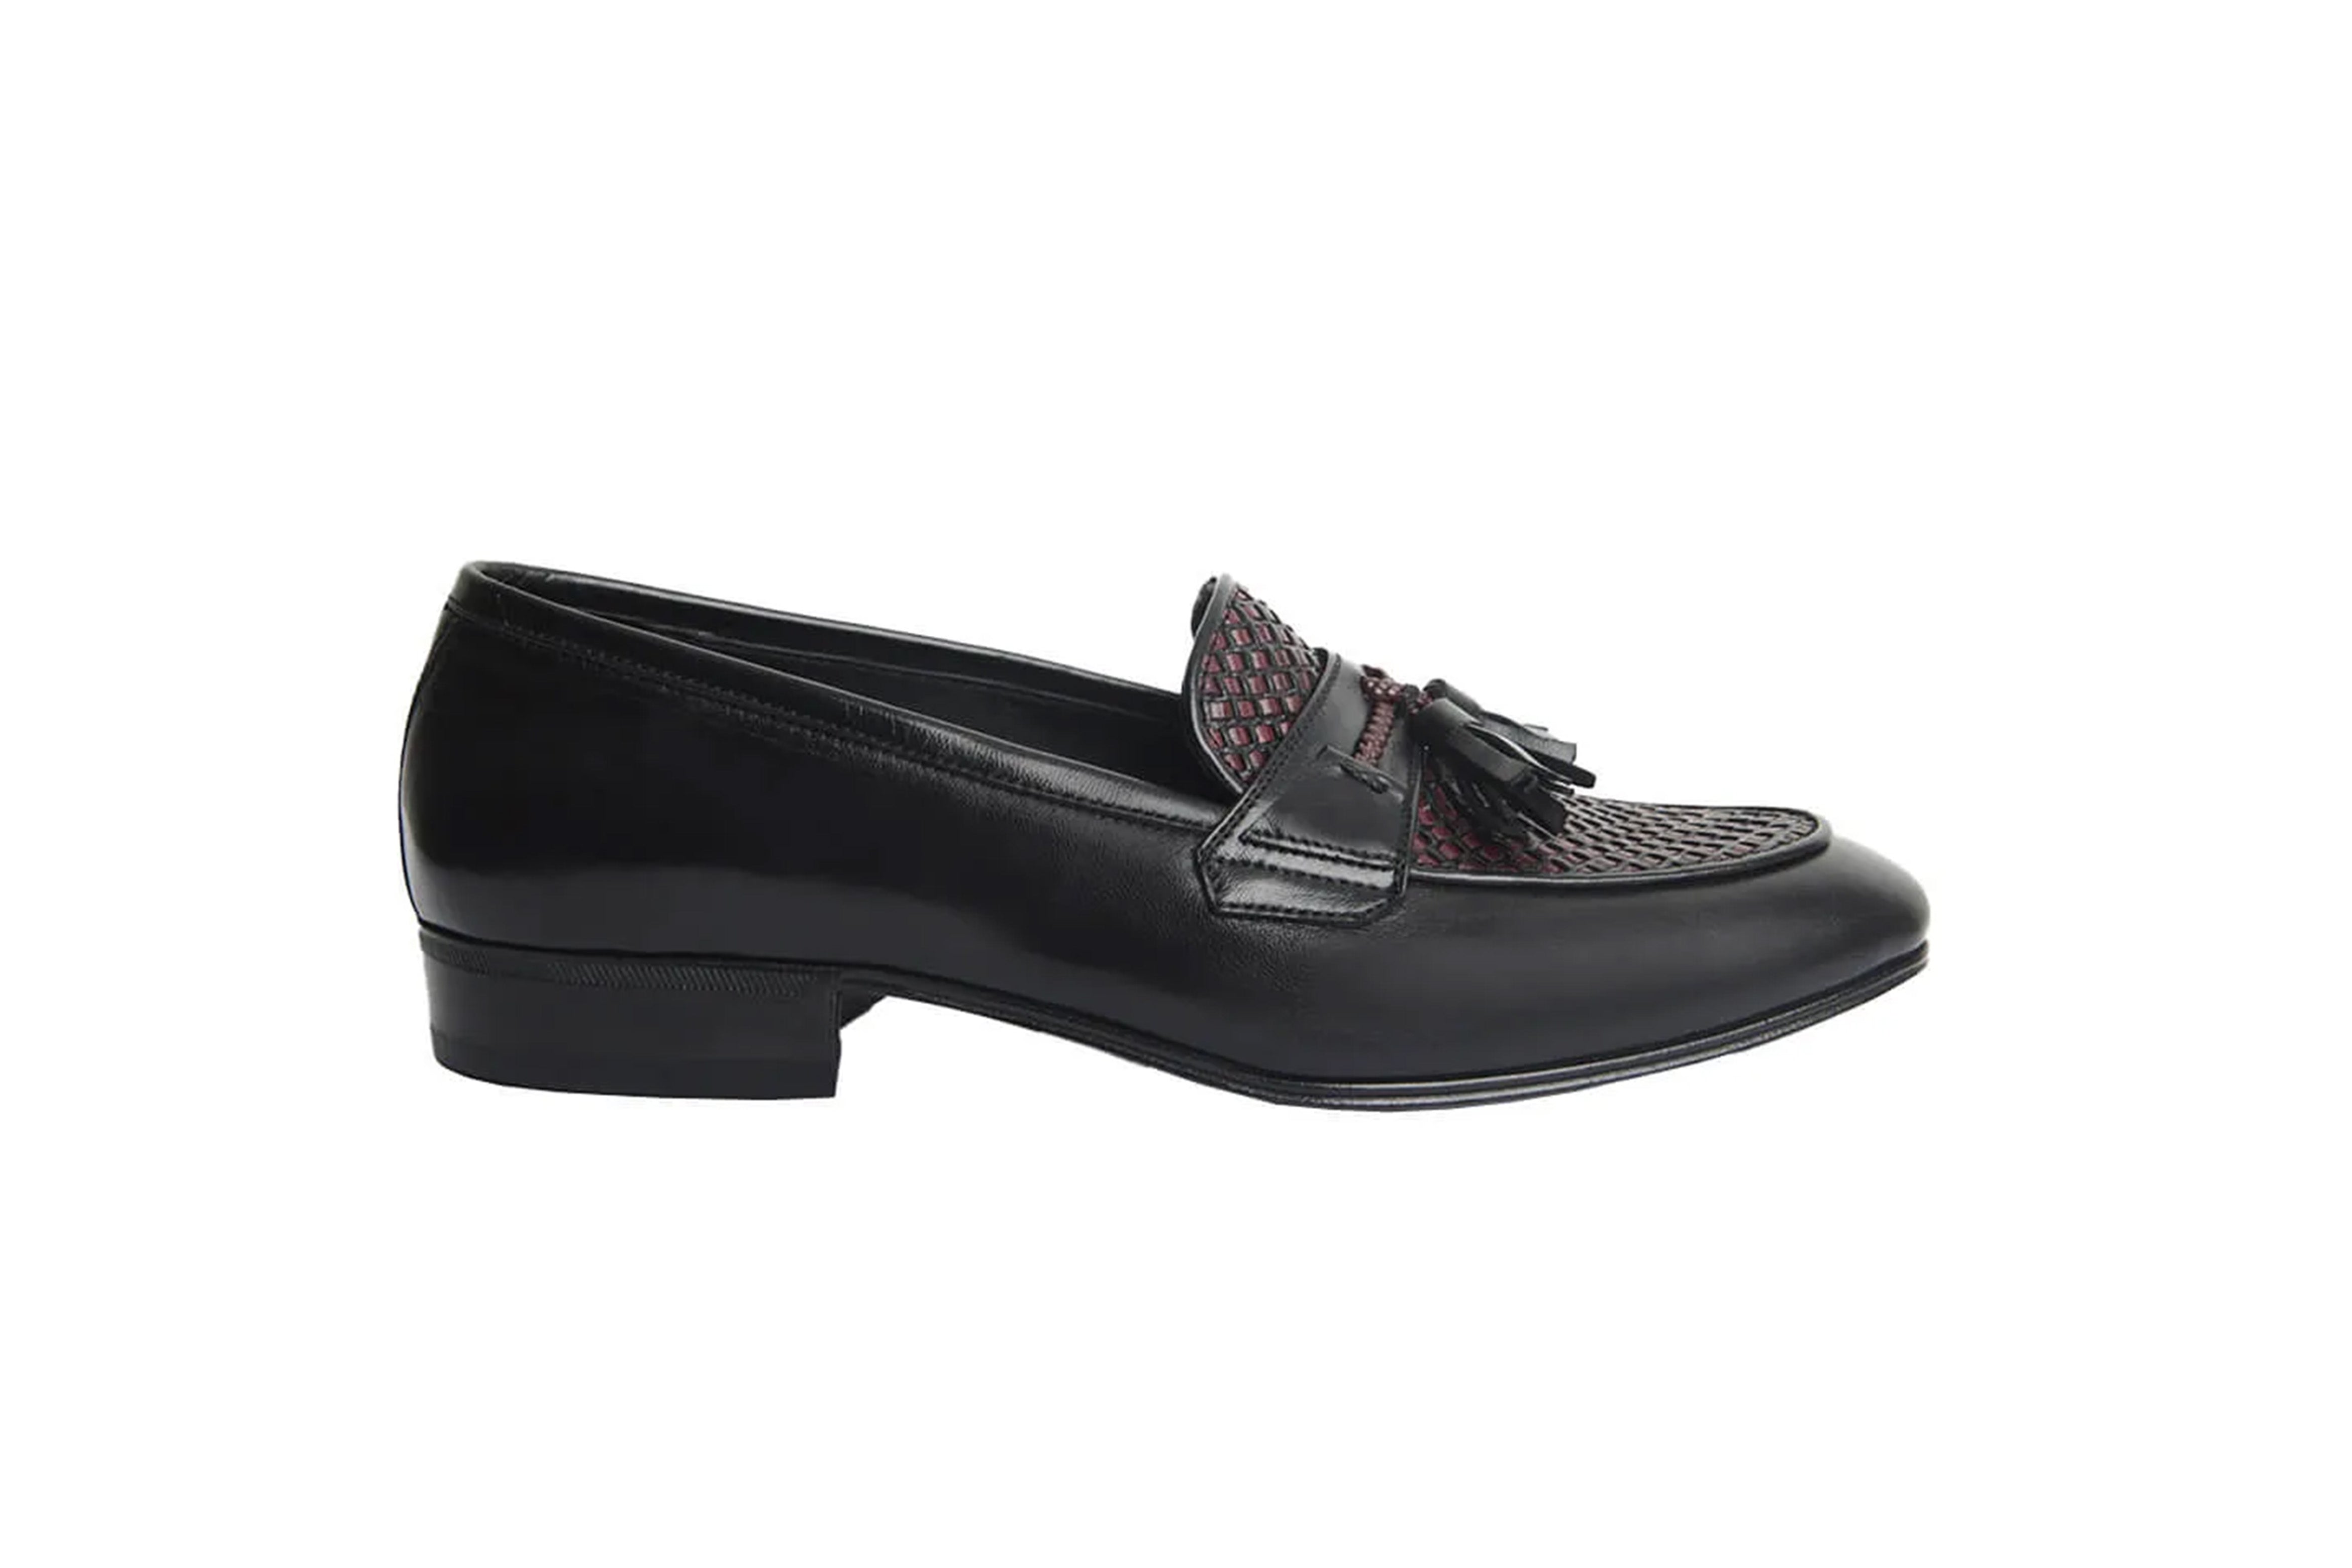 Tassel Loafer Italian Style - Giulio with Tressê detail in 2 colors